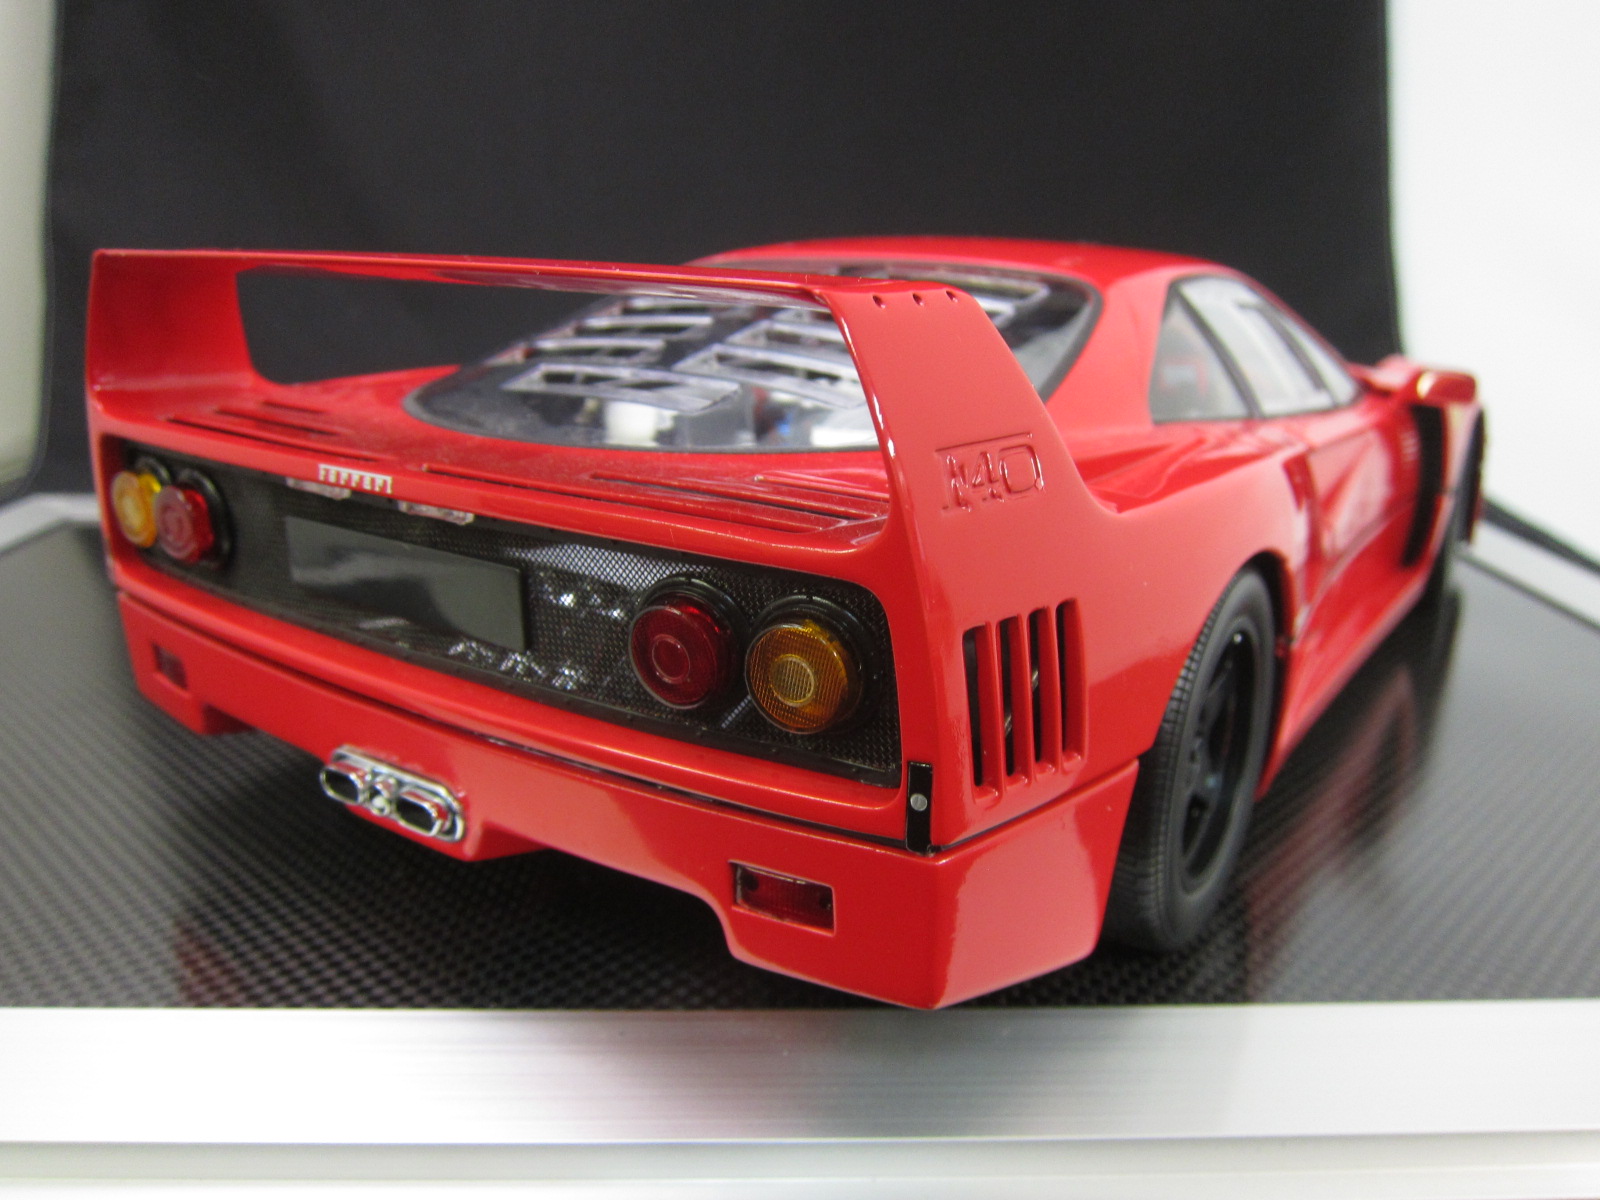 KYOSHO 京商 1/12 フェラーリ F40 LIGHT WEIGHT ダイキャストモデル